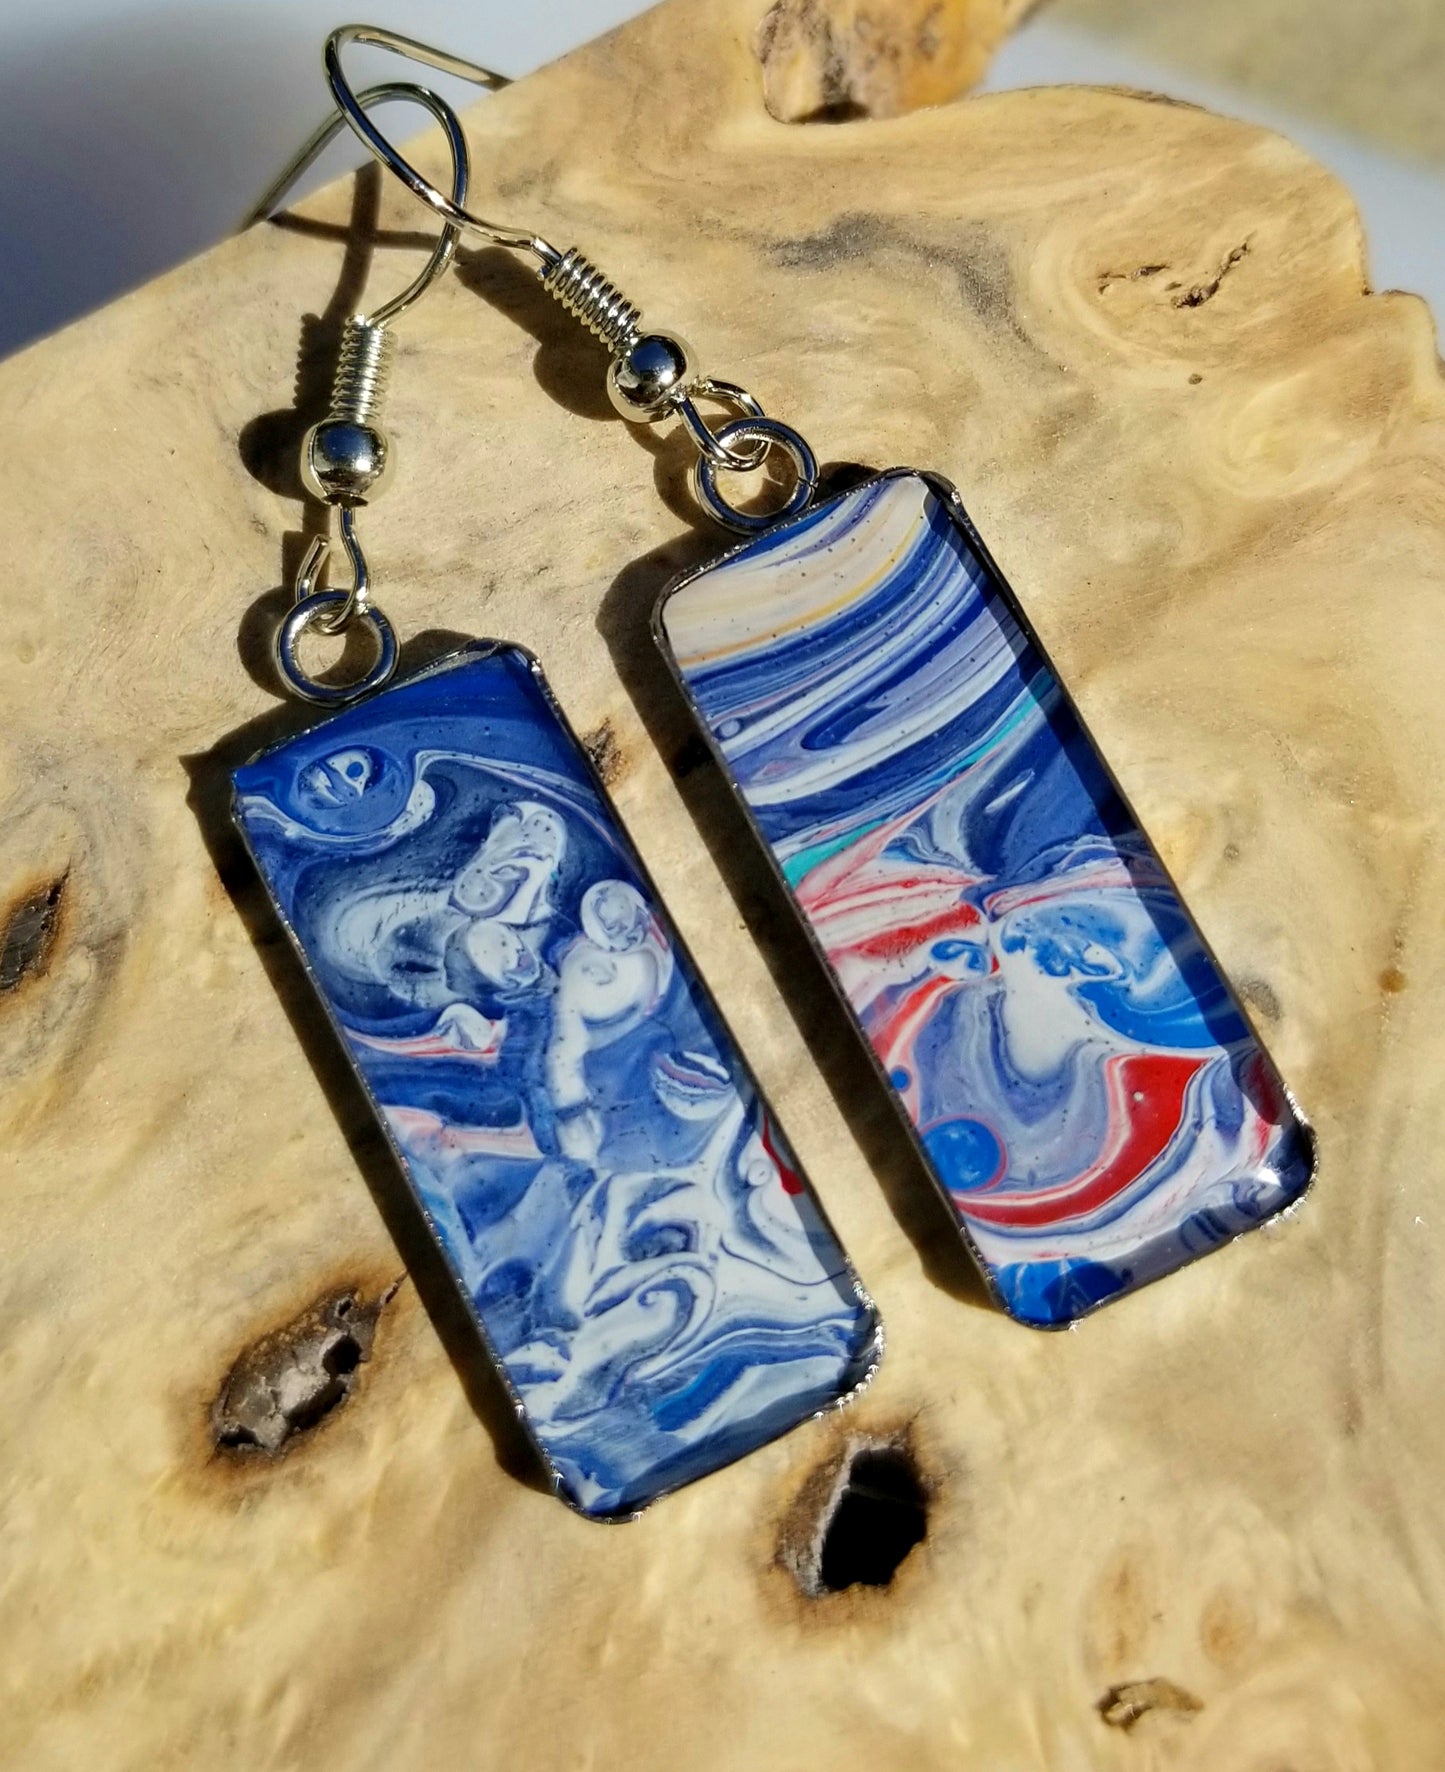 Acrylic Pour Skin with Resin Dome / Silver Tray or Black TrayWire Hook Earrings